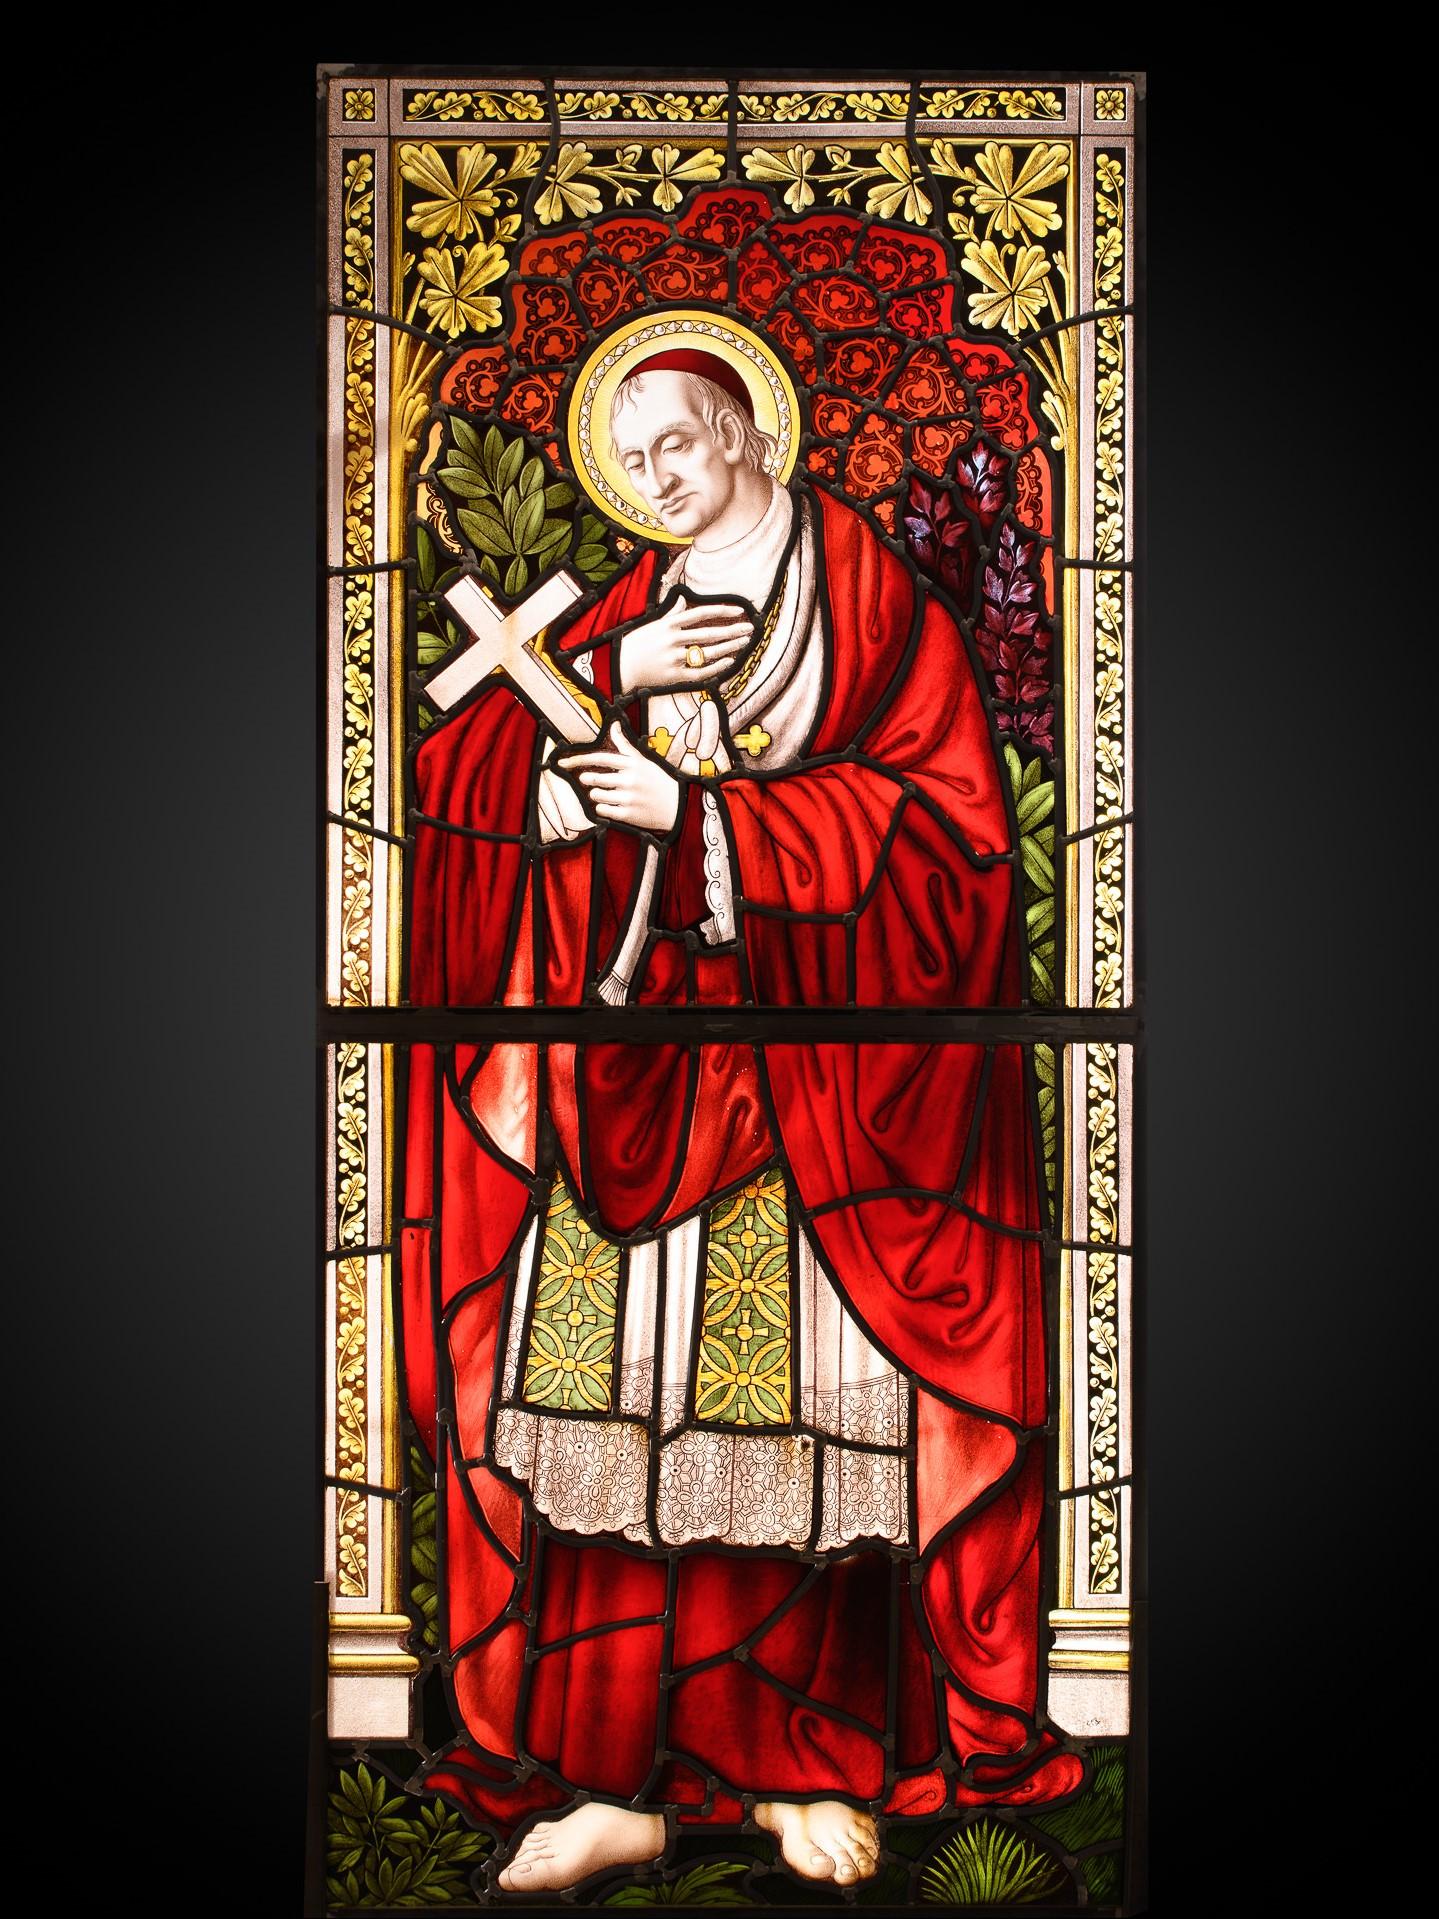 Unknown Figurative Painting - Neo-Gothic Stained Glass Window with Saint Martin